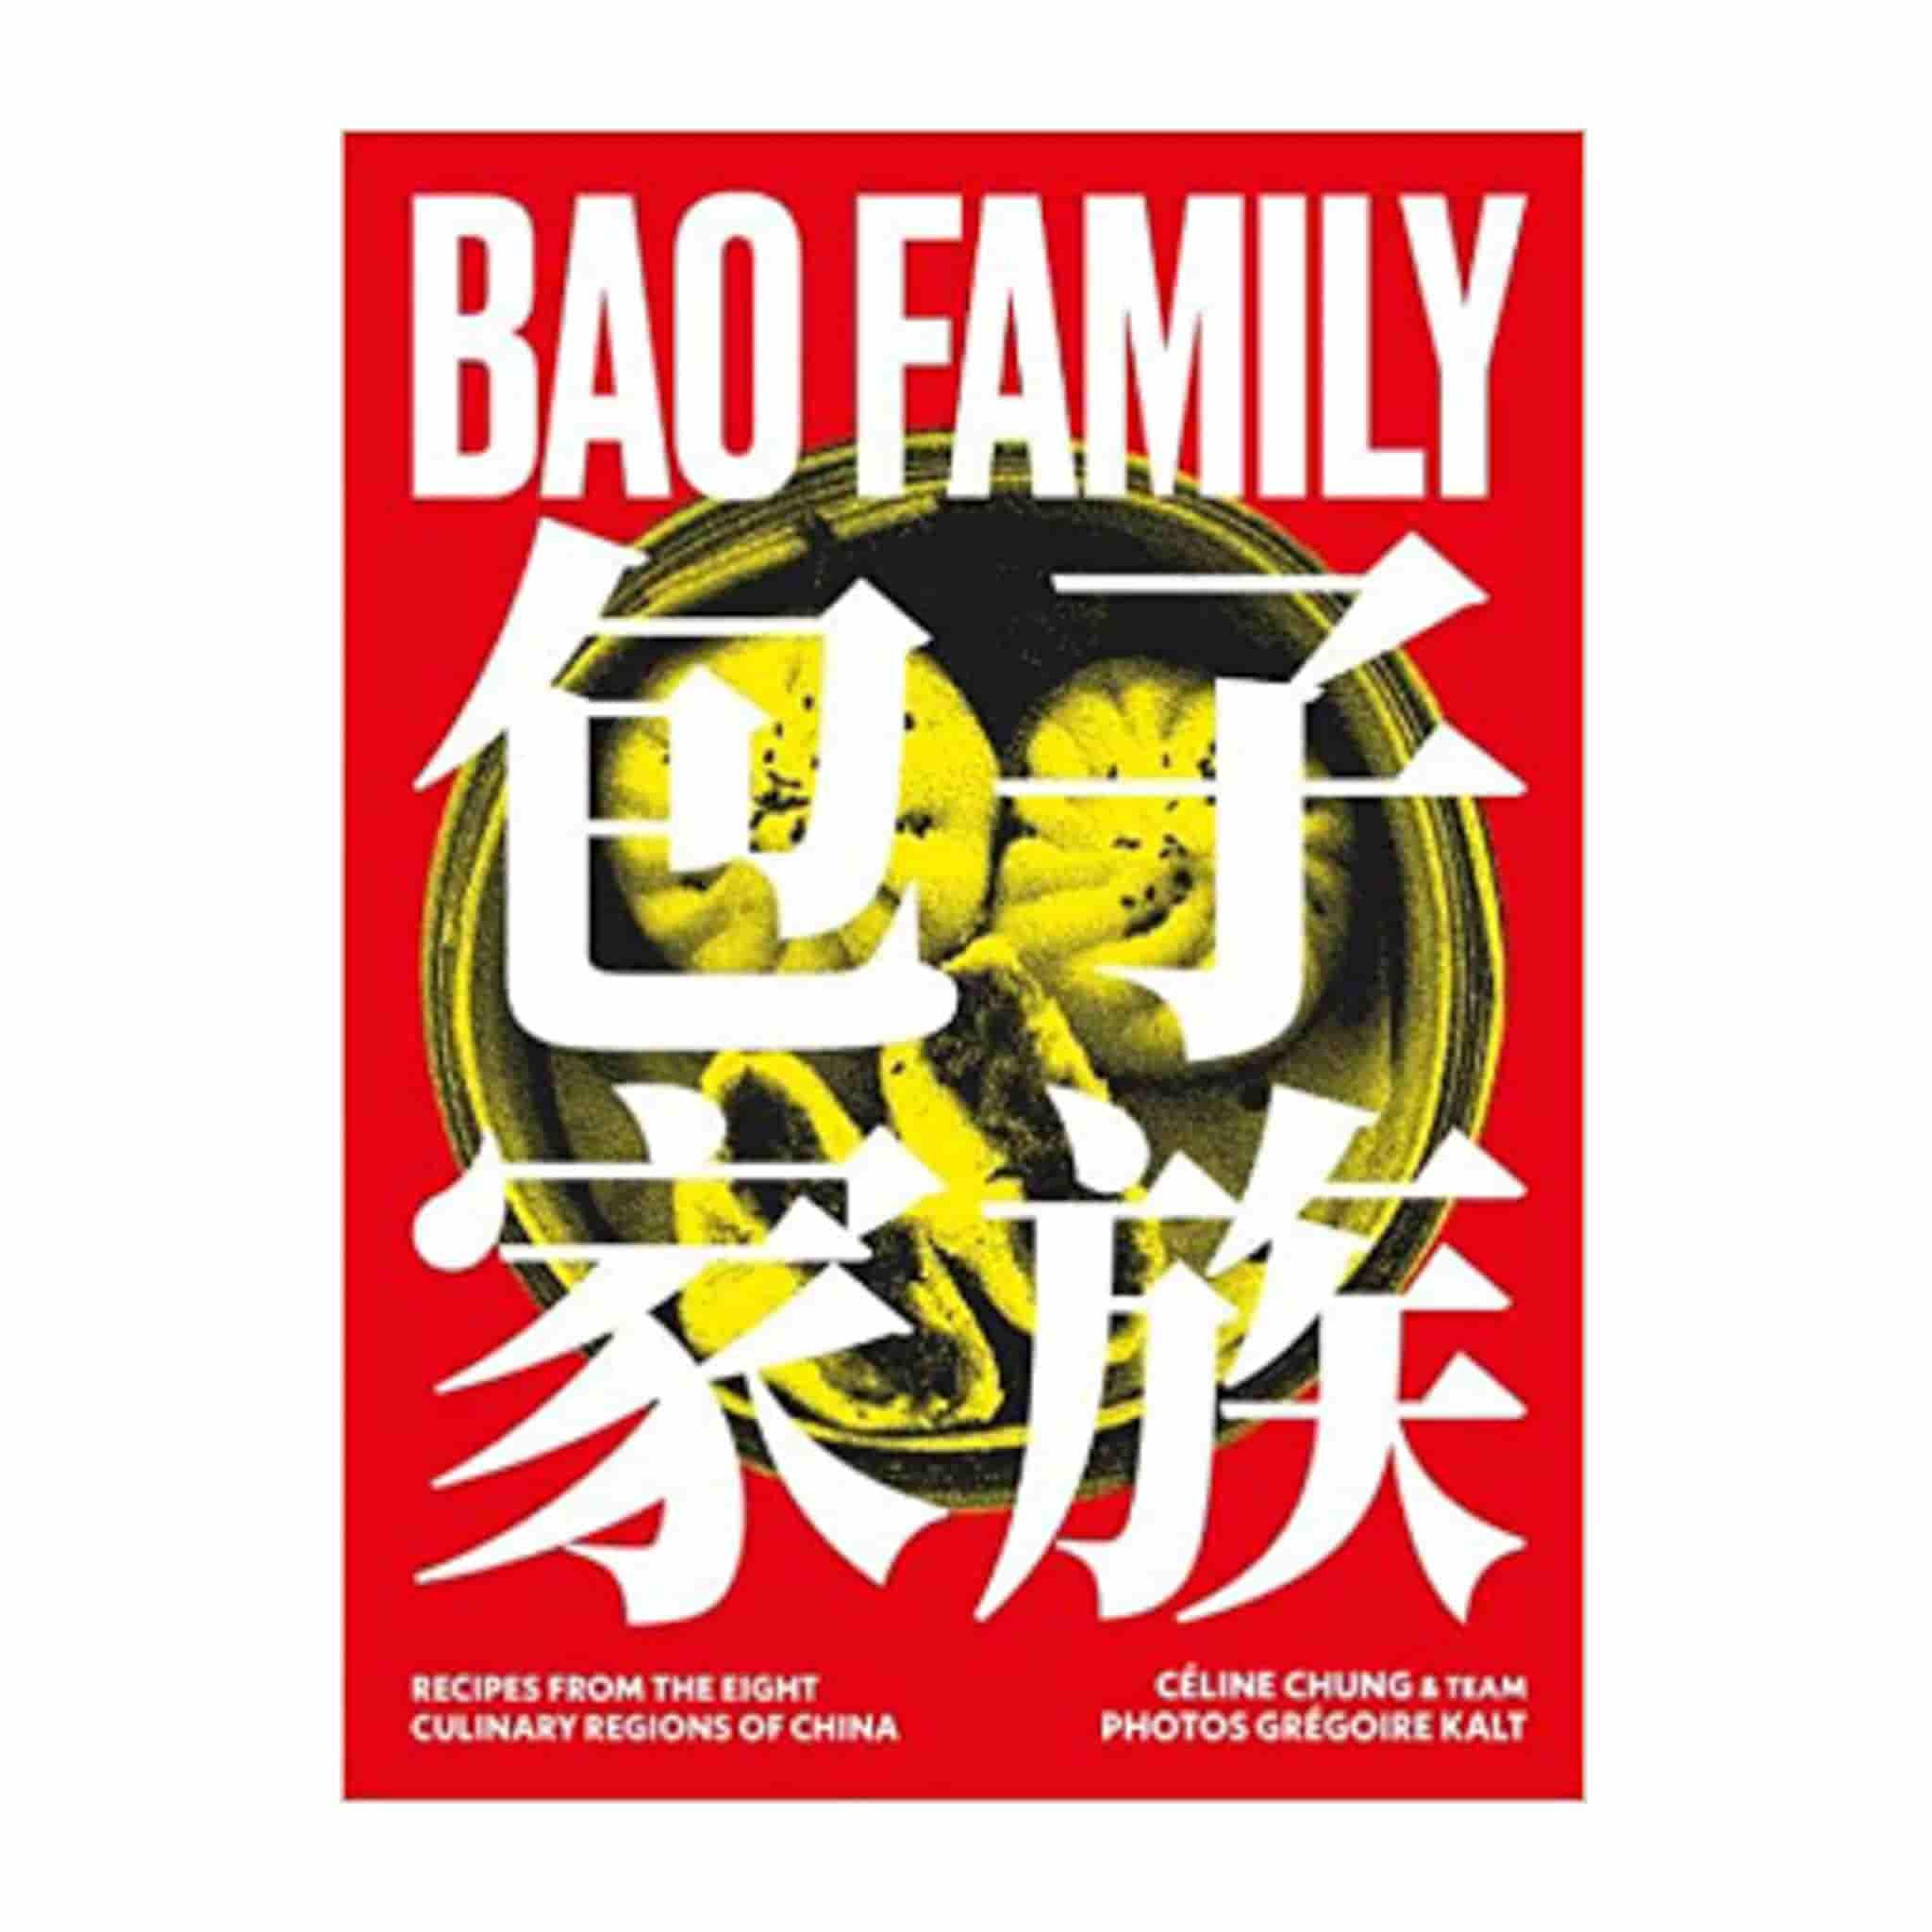 Bao Family: Recipes from the eight culinary regions of China, by Celine Chung